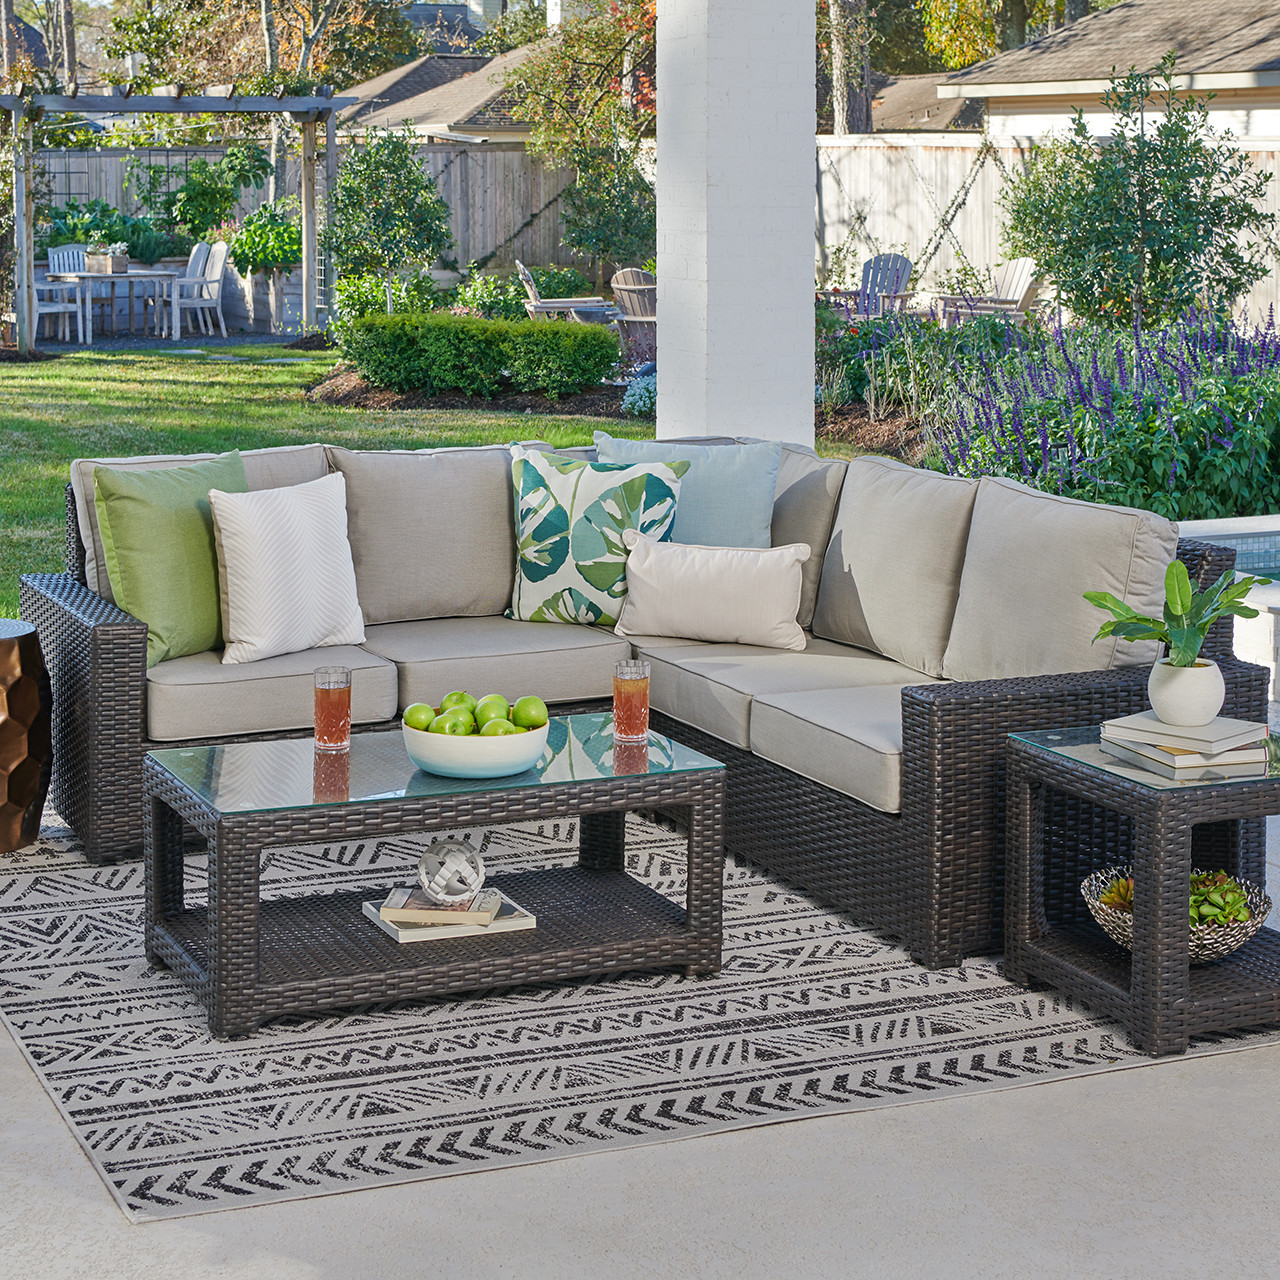 San Lucas Dark Elm Outdoor Wicker with Cushions 4 Piece Sectional + 43 x 23 in. Coffee Table